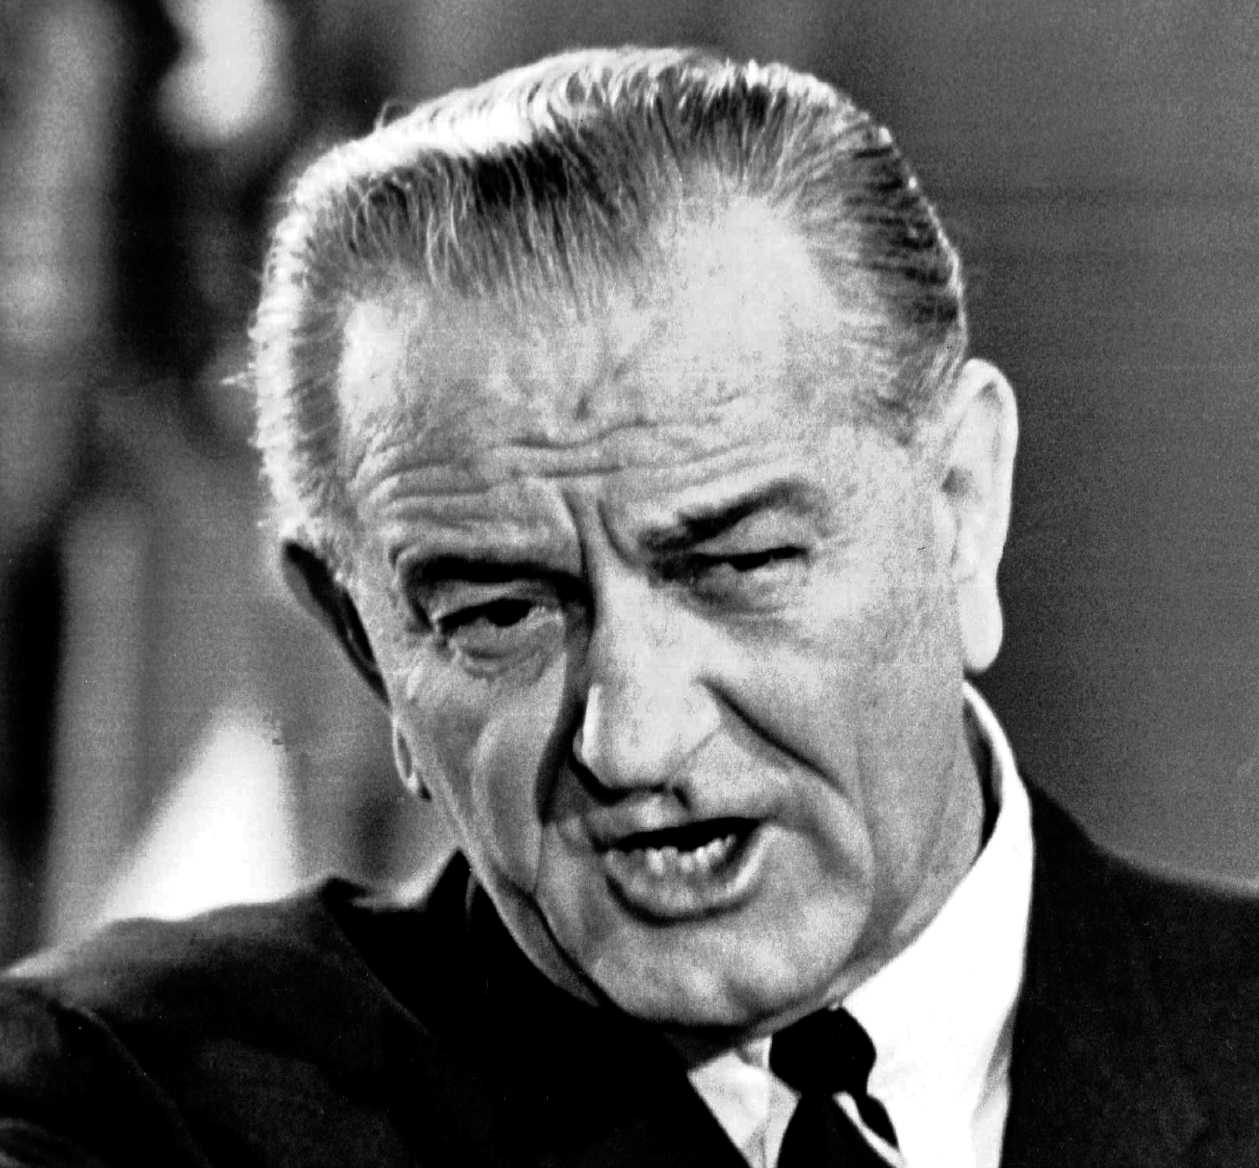 FILE -- This is a Nov. 17, 1967 file photo of former president Lyndon B. Johnson. More than 80 hours of President Lyndon B. Johnson's telephone conversations from the White House, from early 1964, were released Friday, Oct. 11, 1996 by the National Archives and the Lyndon Baines Johnson Library. The tapes reveal an administration struggling to form a Vietnam policy while keeping quiet about the escalating death toll. (AP Photo/File)